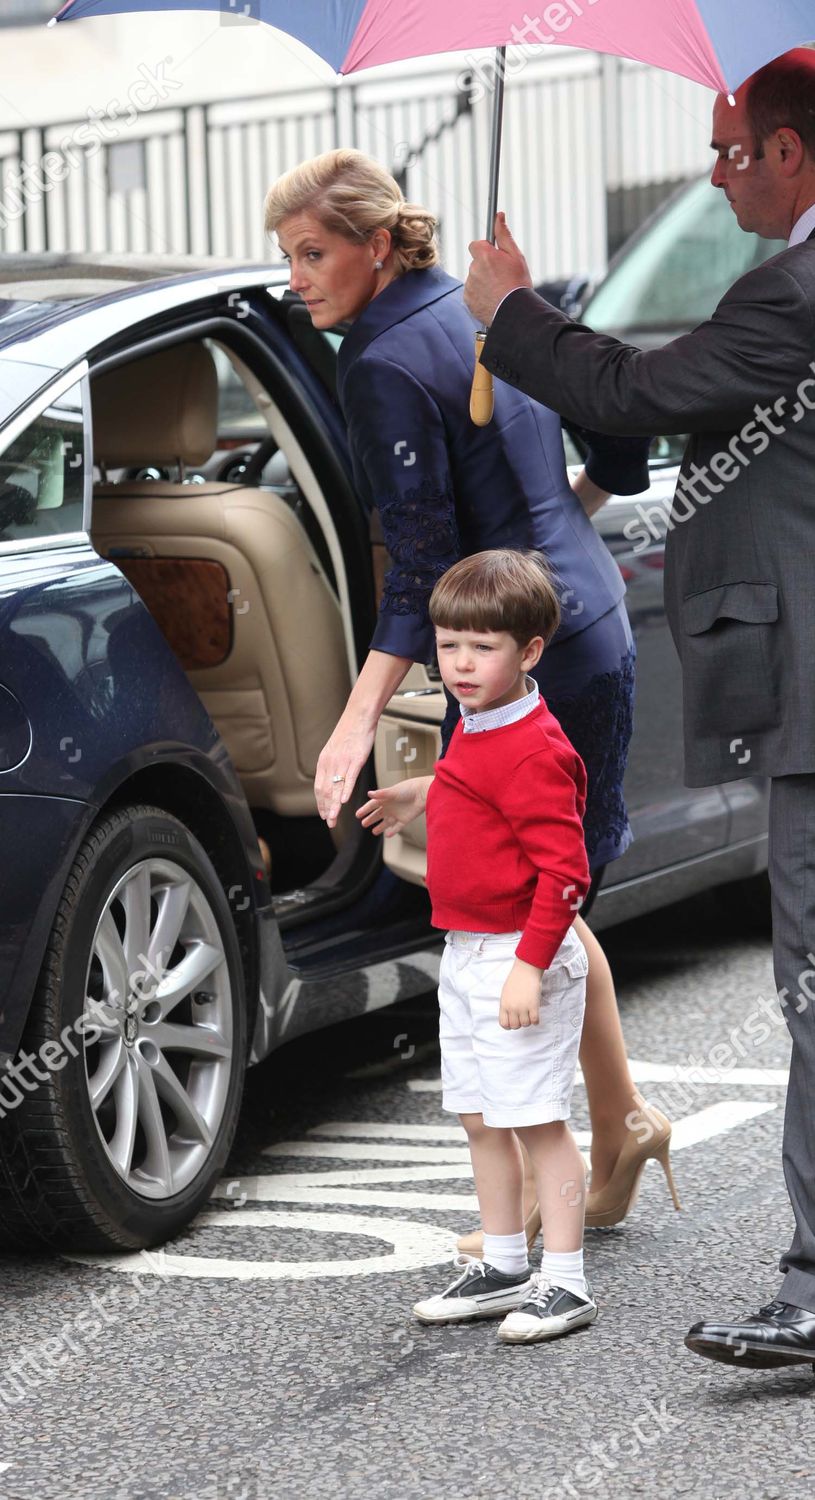 prince-edward-and-family-at-the-king-edward-vii-hospital-where-prince-philip-is-being-treated-london-britain-shutterstock-editorial-1732760h.jpg